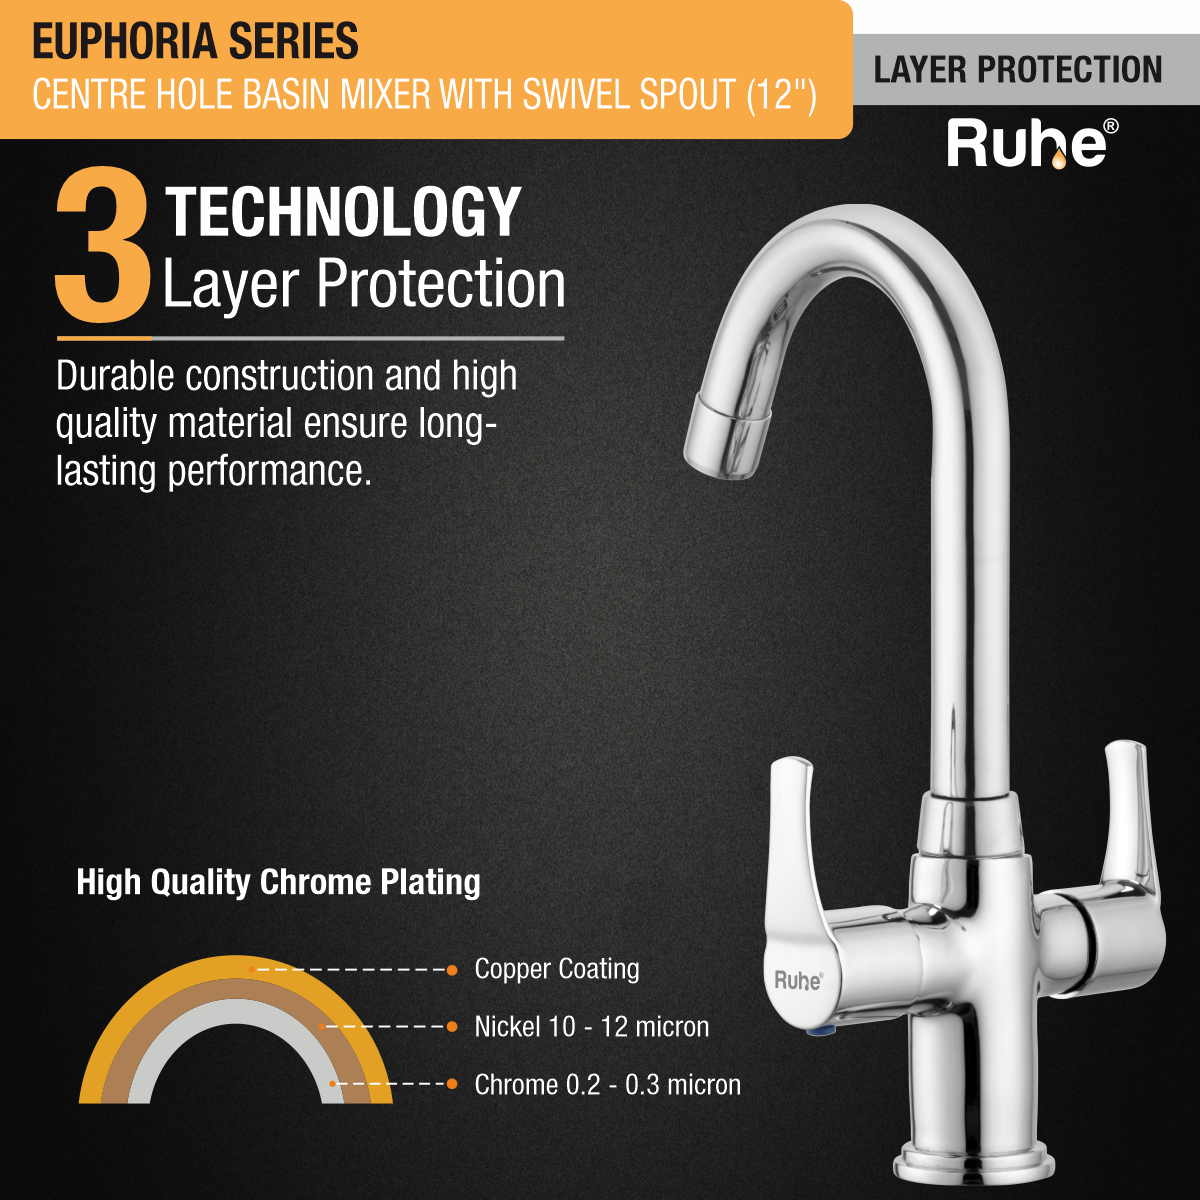 Euphoria Centre Hole Basin Mixer with Small (12 inches) Round Swivel Spout Faucet 3 layer protection